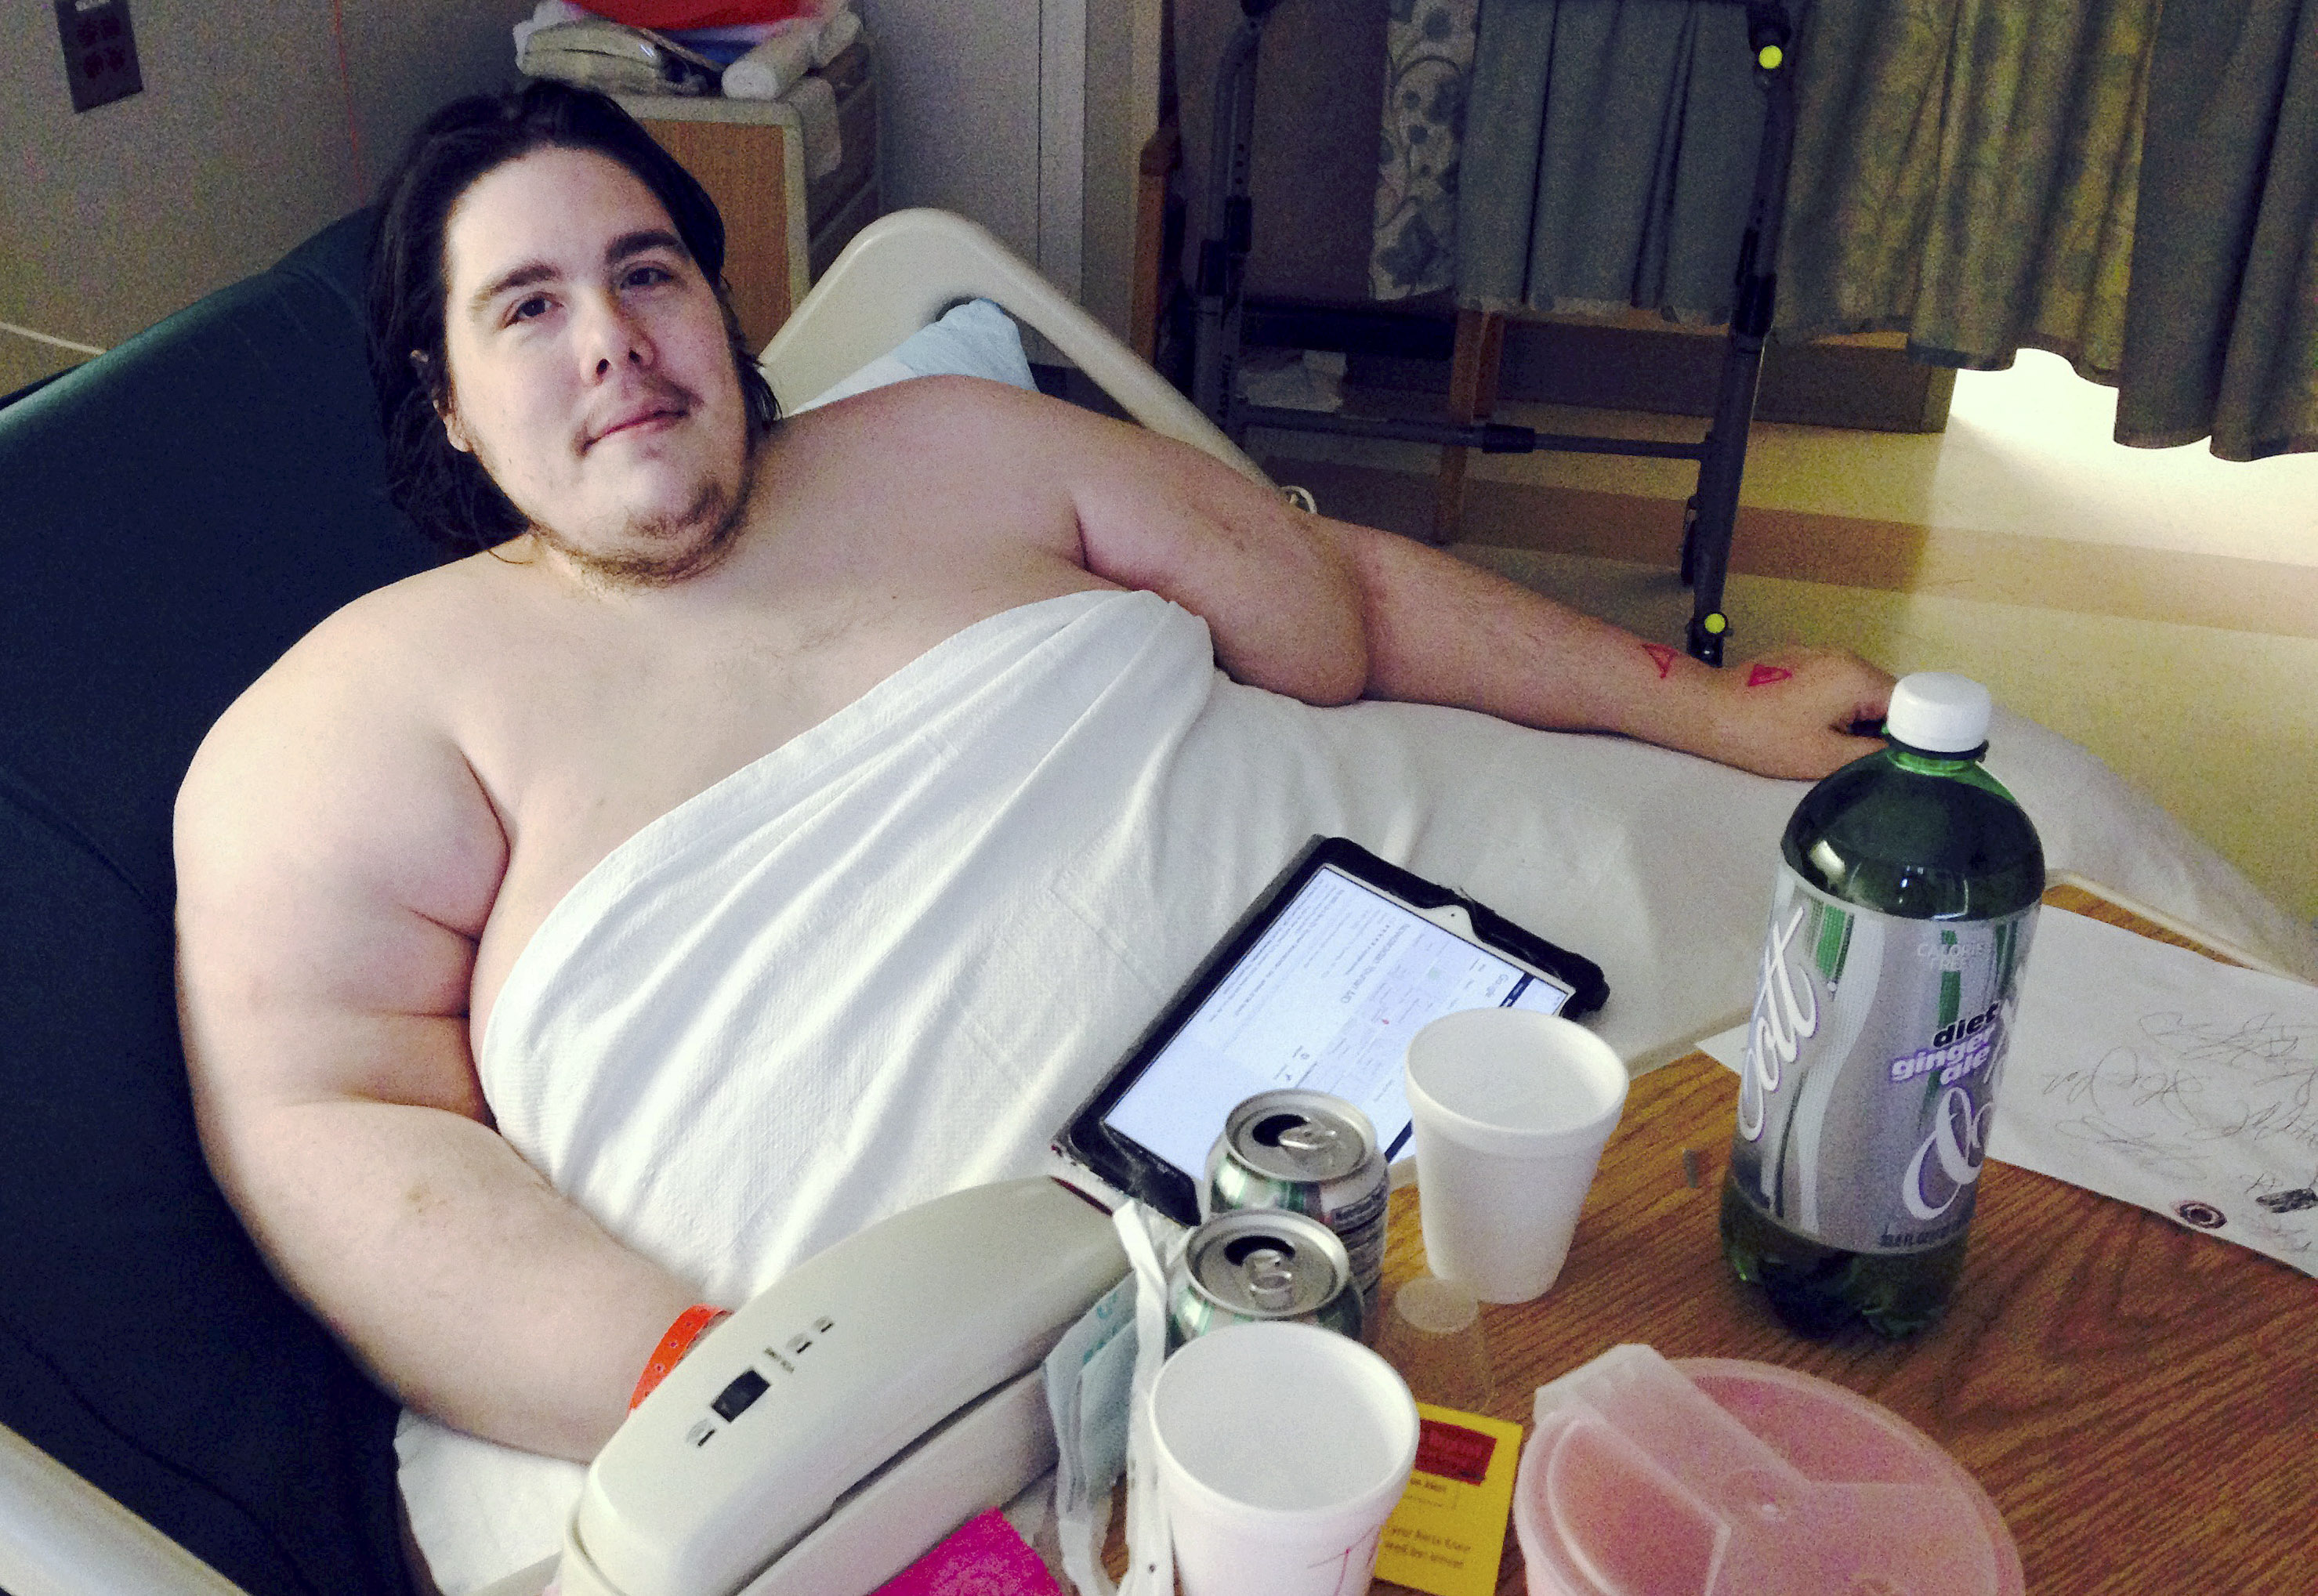 800-pound Rhode Island Man Says He’s Determined To Slim Down.